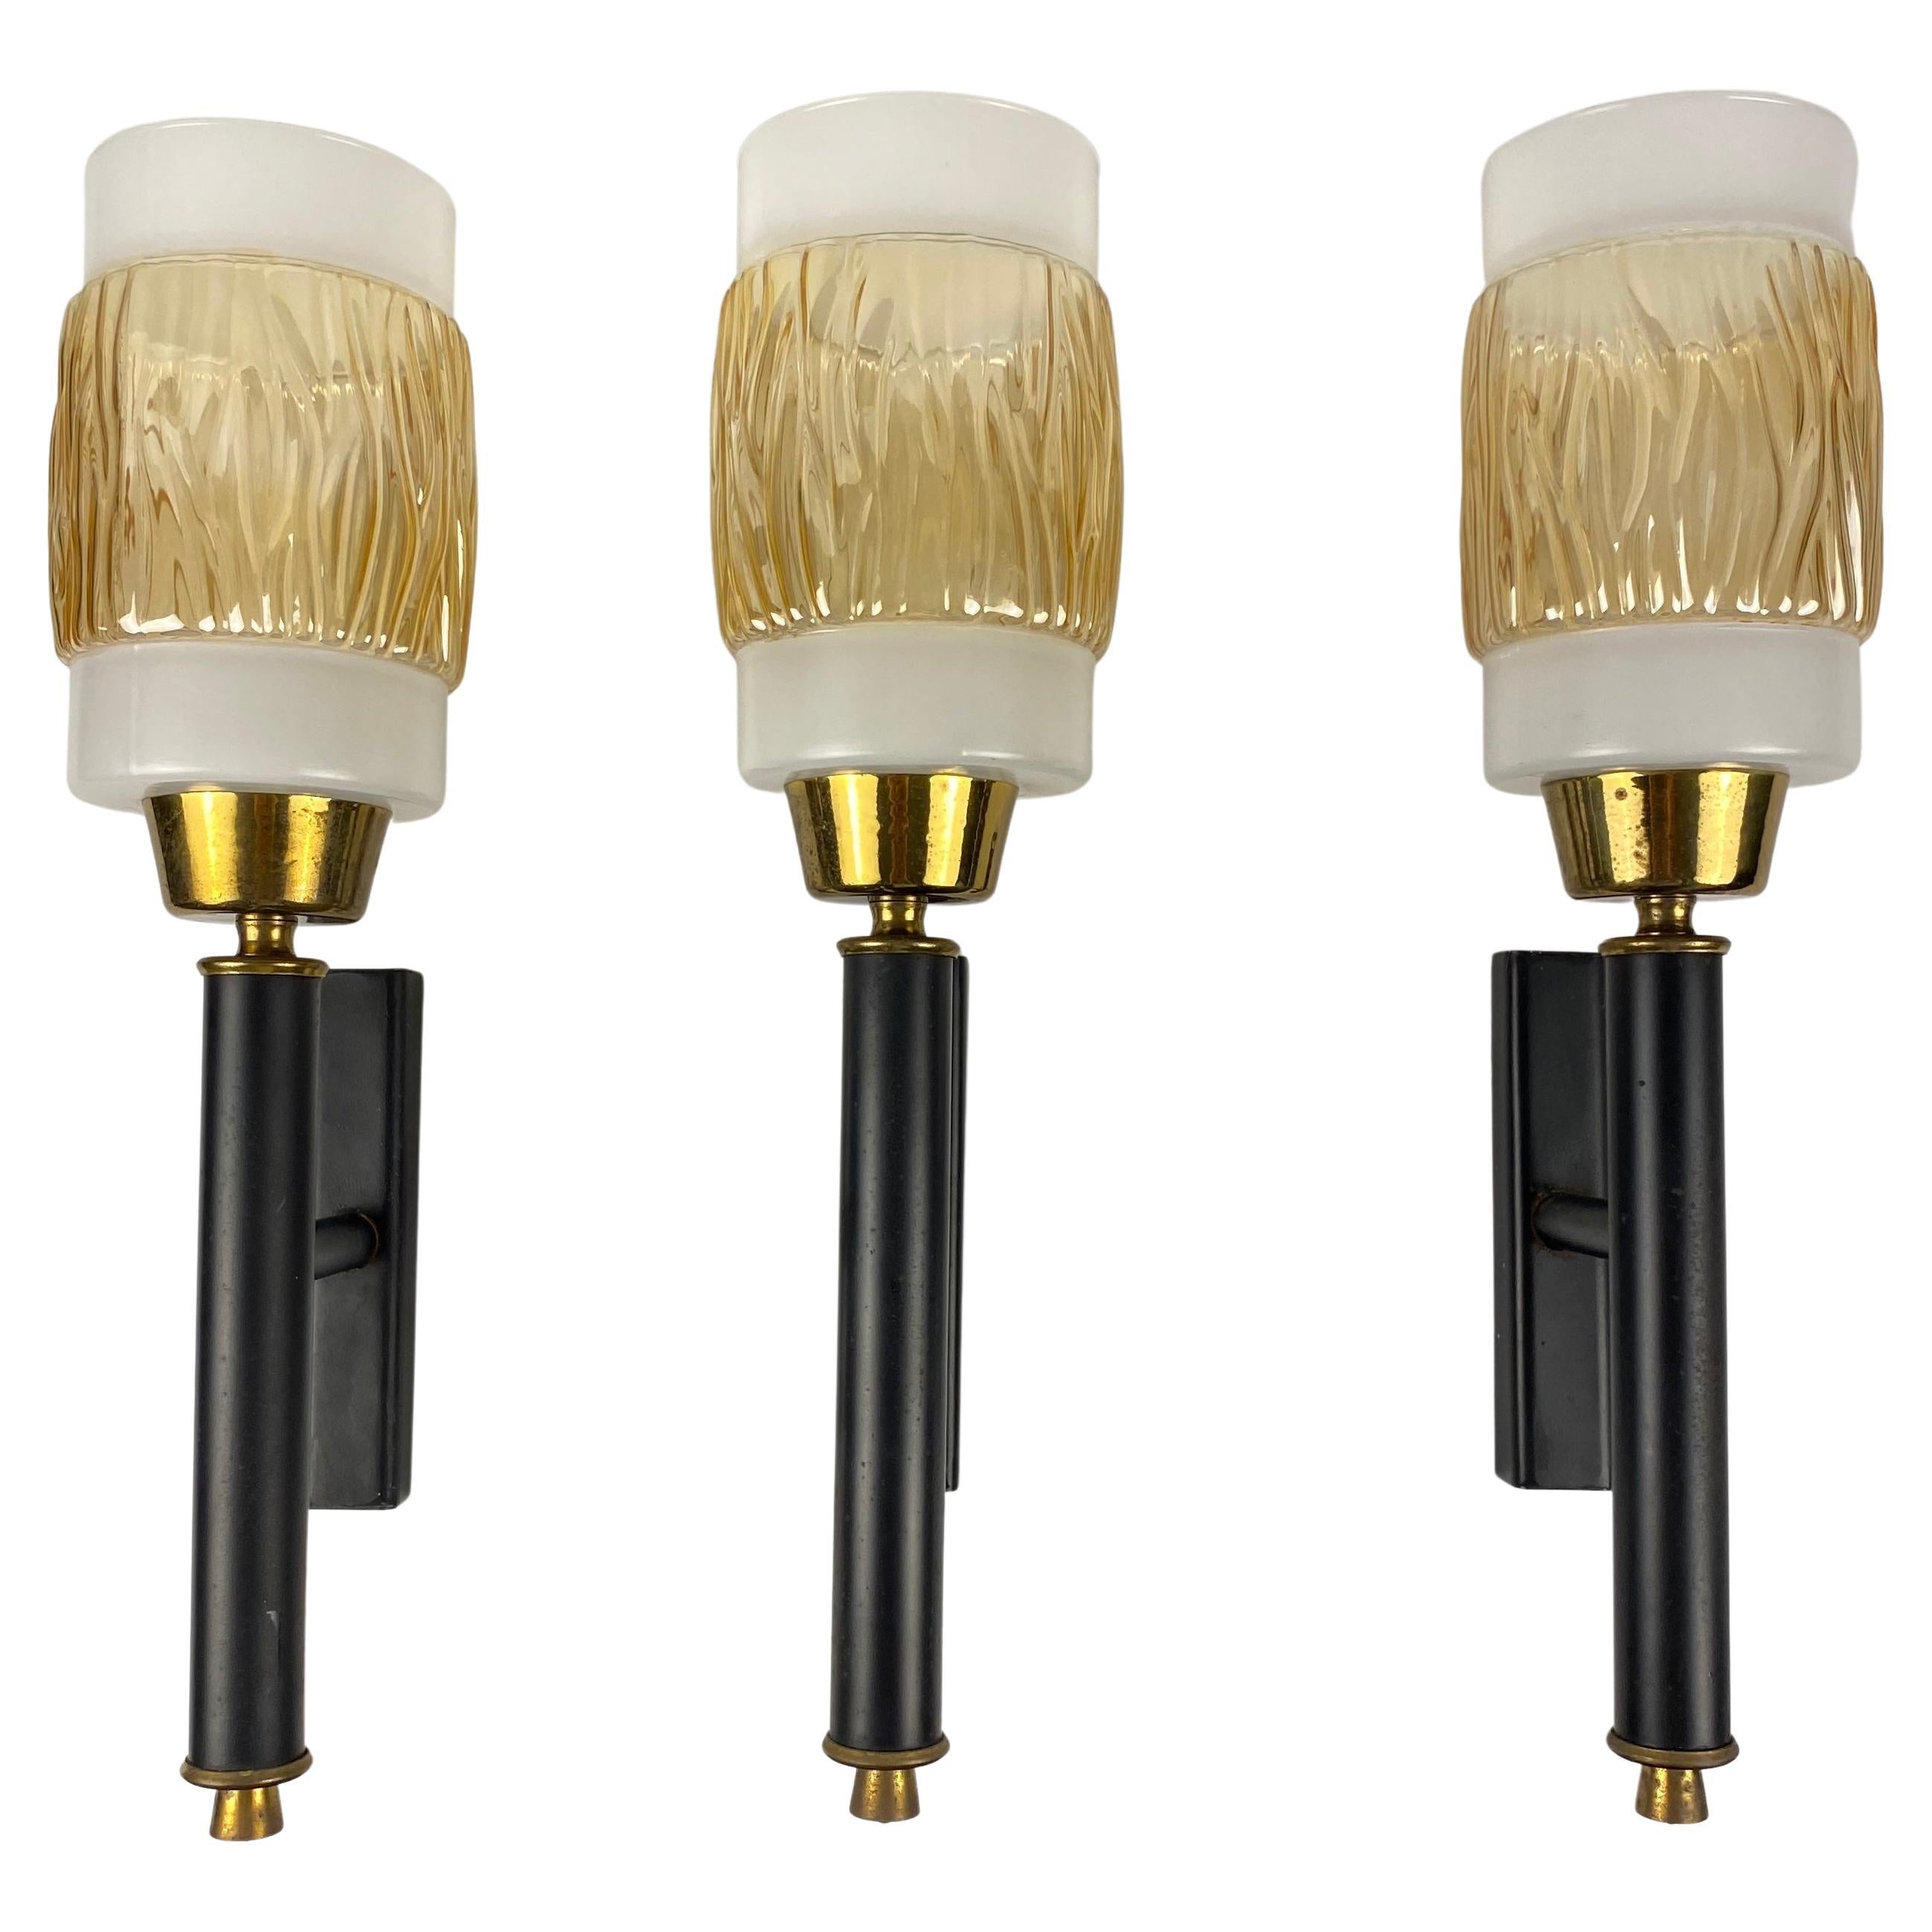 Molded Set of 3 Midcentury Glass and Brass Sconces, Attributed to Maison Arlus/Lunel  For Sale